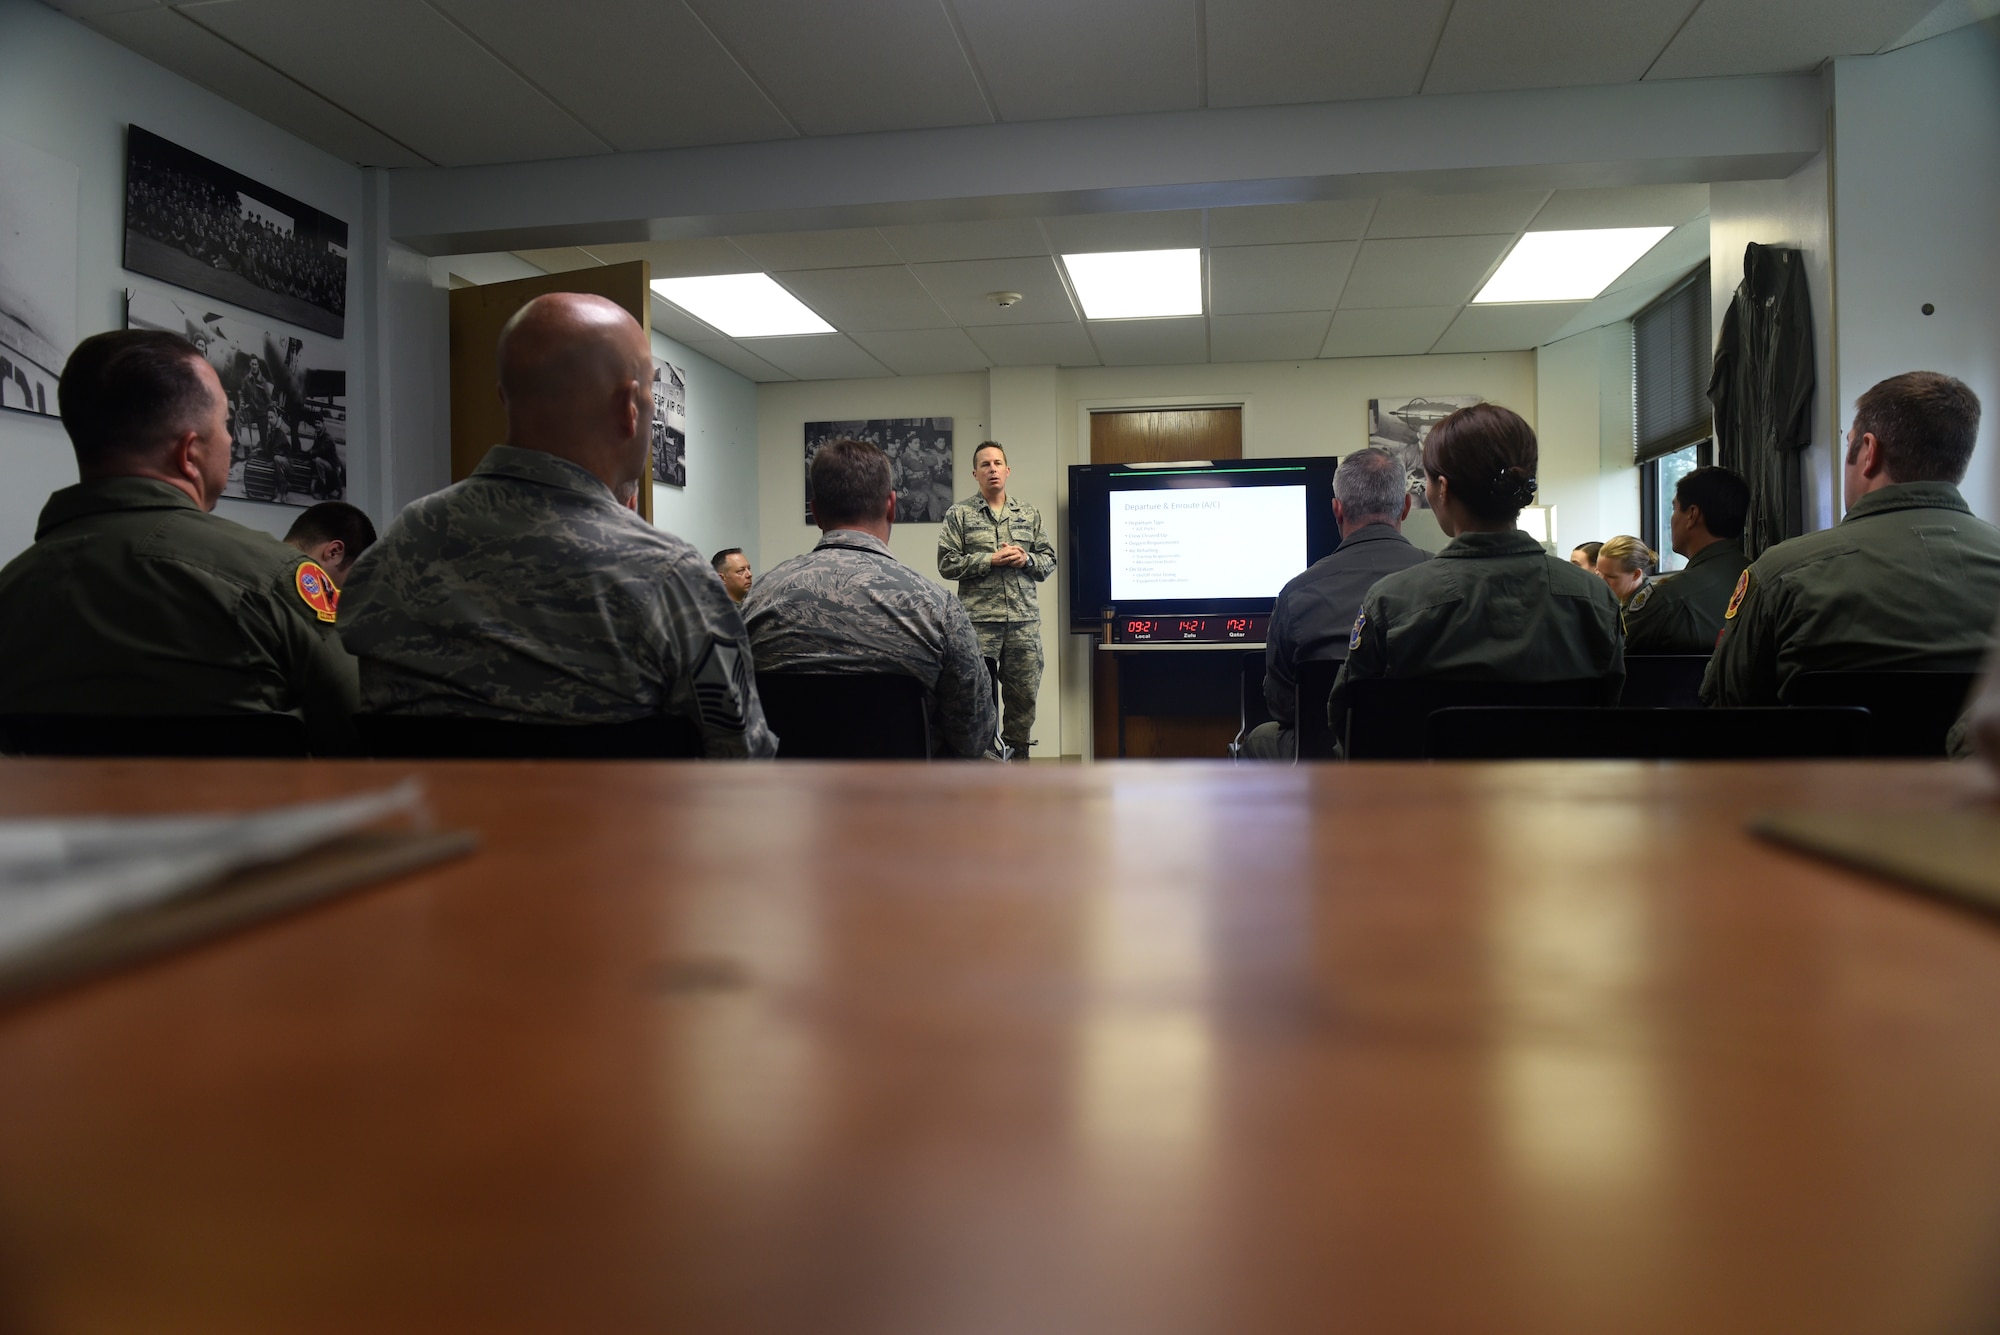 Nebraska Air National Guard Lt. Col. Mike Holdcroft, 170th Operational Support Squadron commander, leads a preflight mission-briefing Aug. 4, 2018 at Offutt Air Force Base, Nebraska. Holdcroft was the aircraft commander of the RC-135V/W Rivet Joint weekend training sortie with a flight and mission crew comprised almost exclusively of reserve component Airmen. The objective of the preflight briefing is to communicate a common operating picture of meteorological and aeronautical information to the entire crew necessary for the conduct of a safe and efficient flight. (U.S. Air Force photo by 2nd Lt. Drew Nystrom)